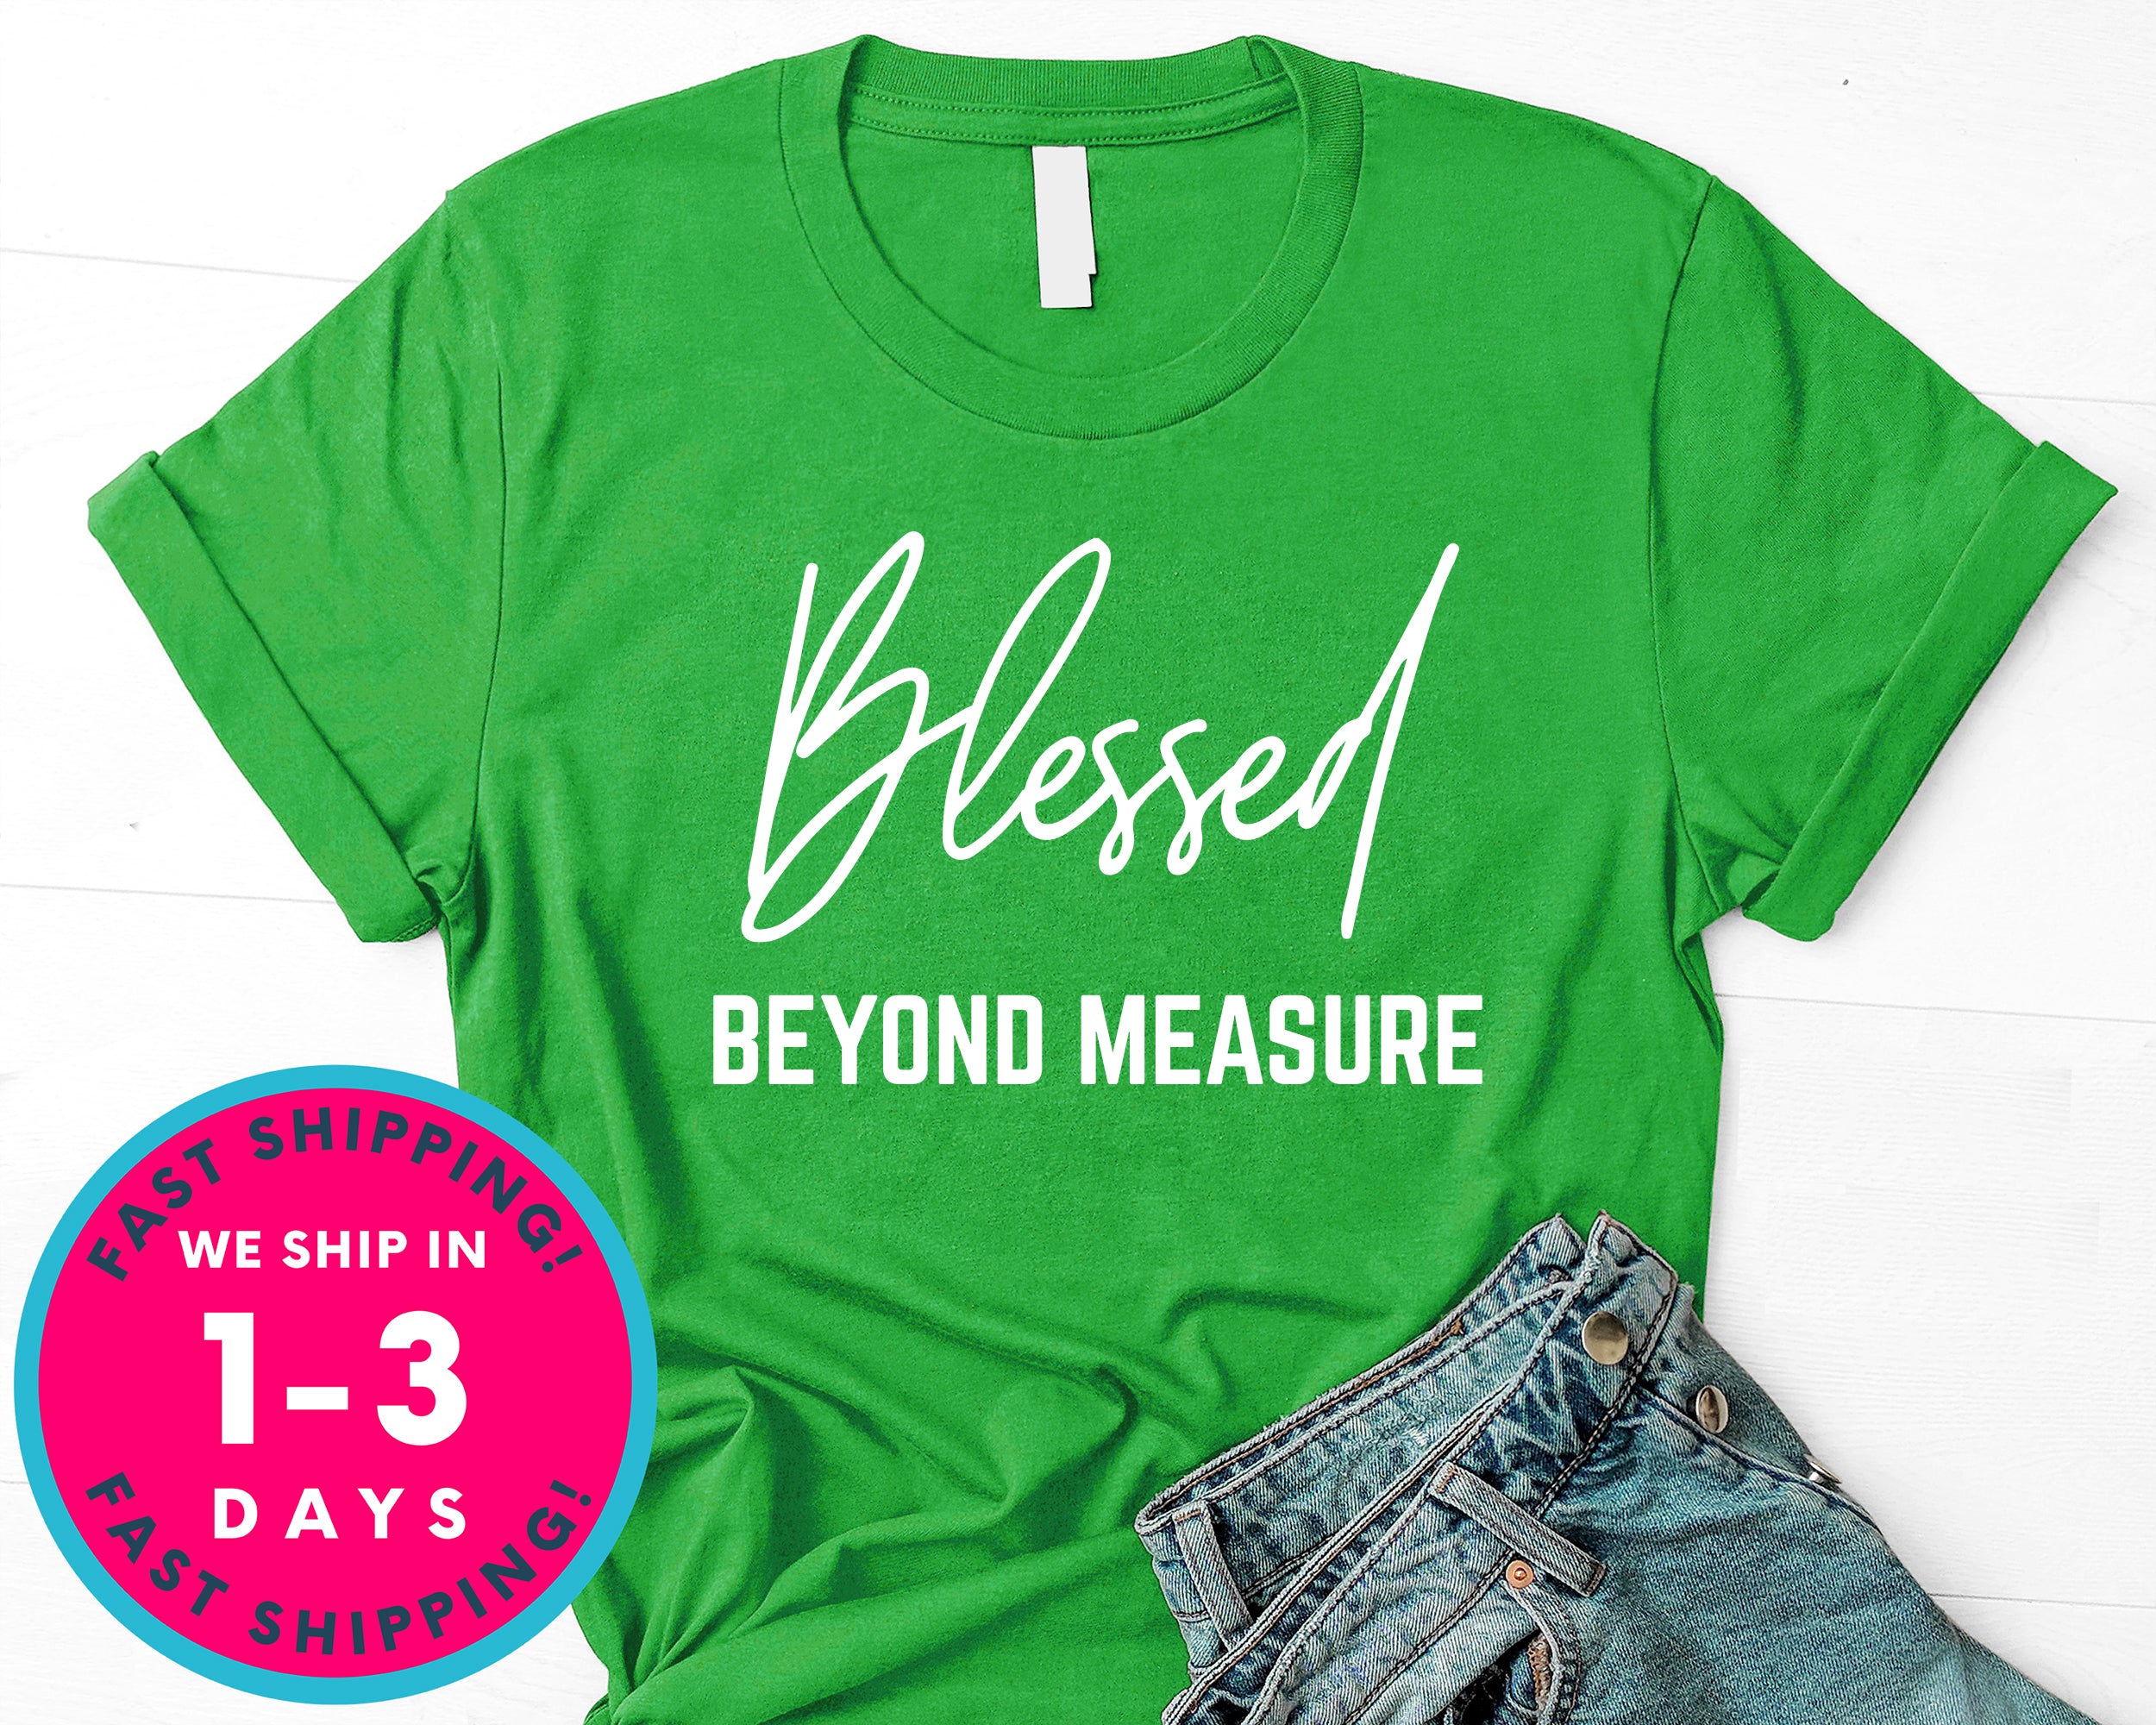 Blessed Beyond Measure Christian T-Shirt - Inspirational Quotes Saying Shirt